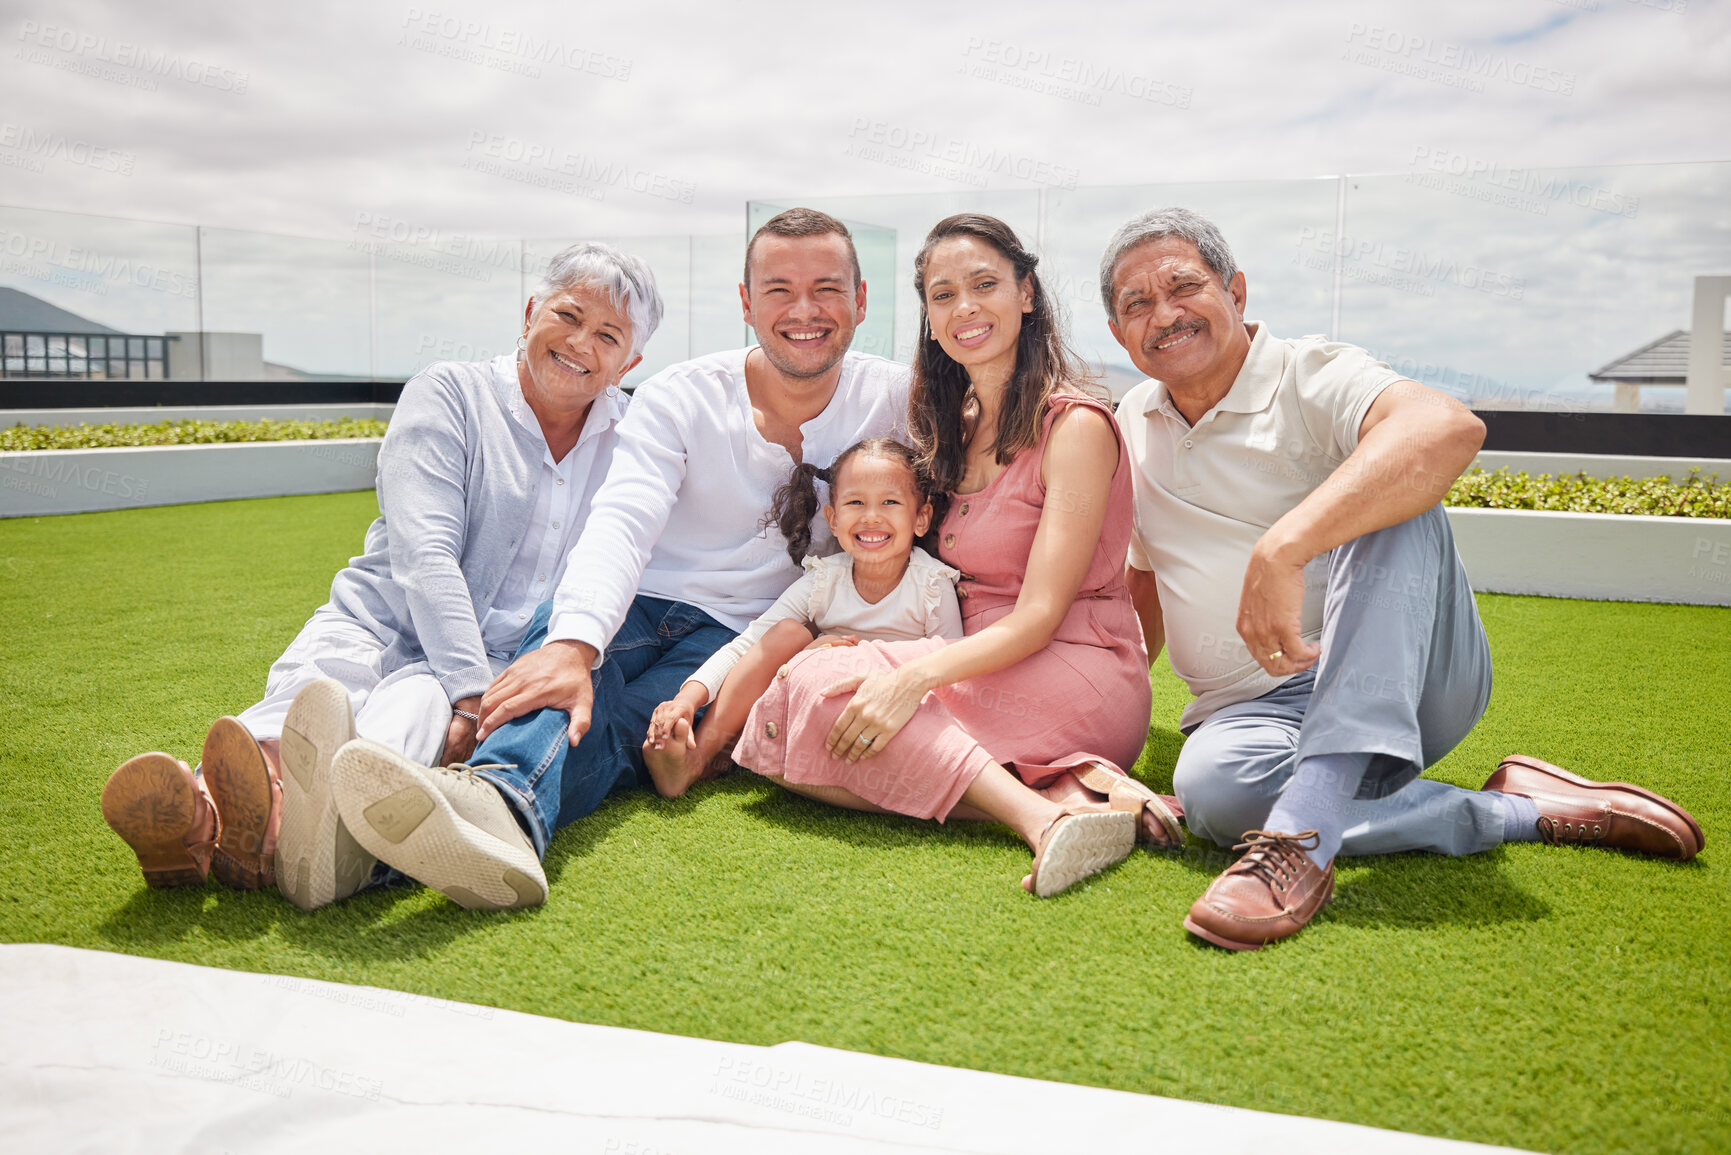 Buy stock photo Portrait of happy big family with girl, love and a smile while sitting on backyard, lawn or grass. Grandfather, grandmother and mom with dad and child or kid bonding outside home in the sunshine.

